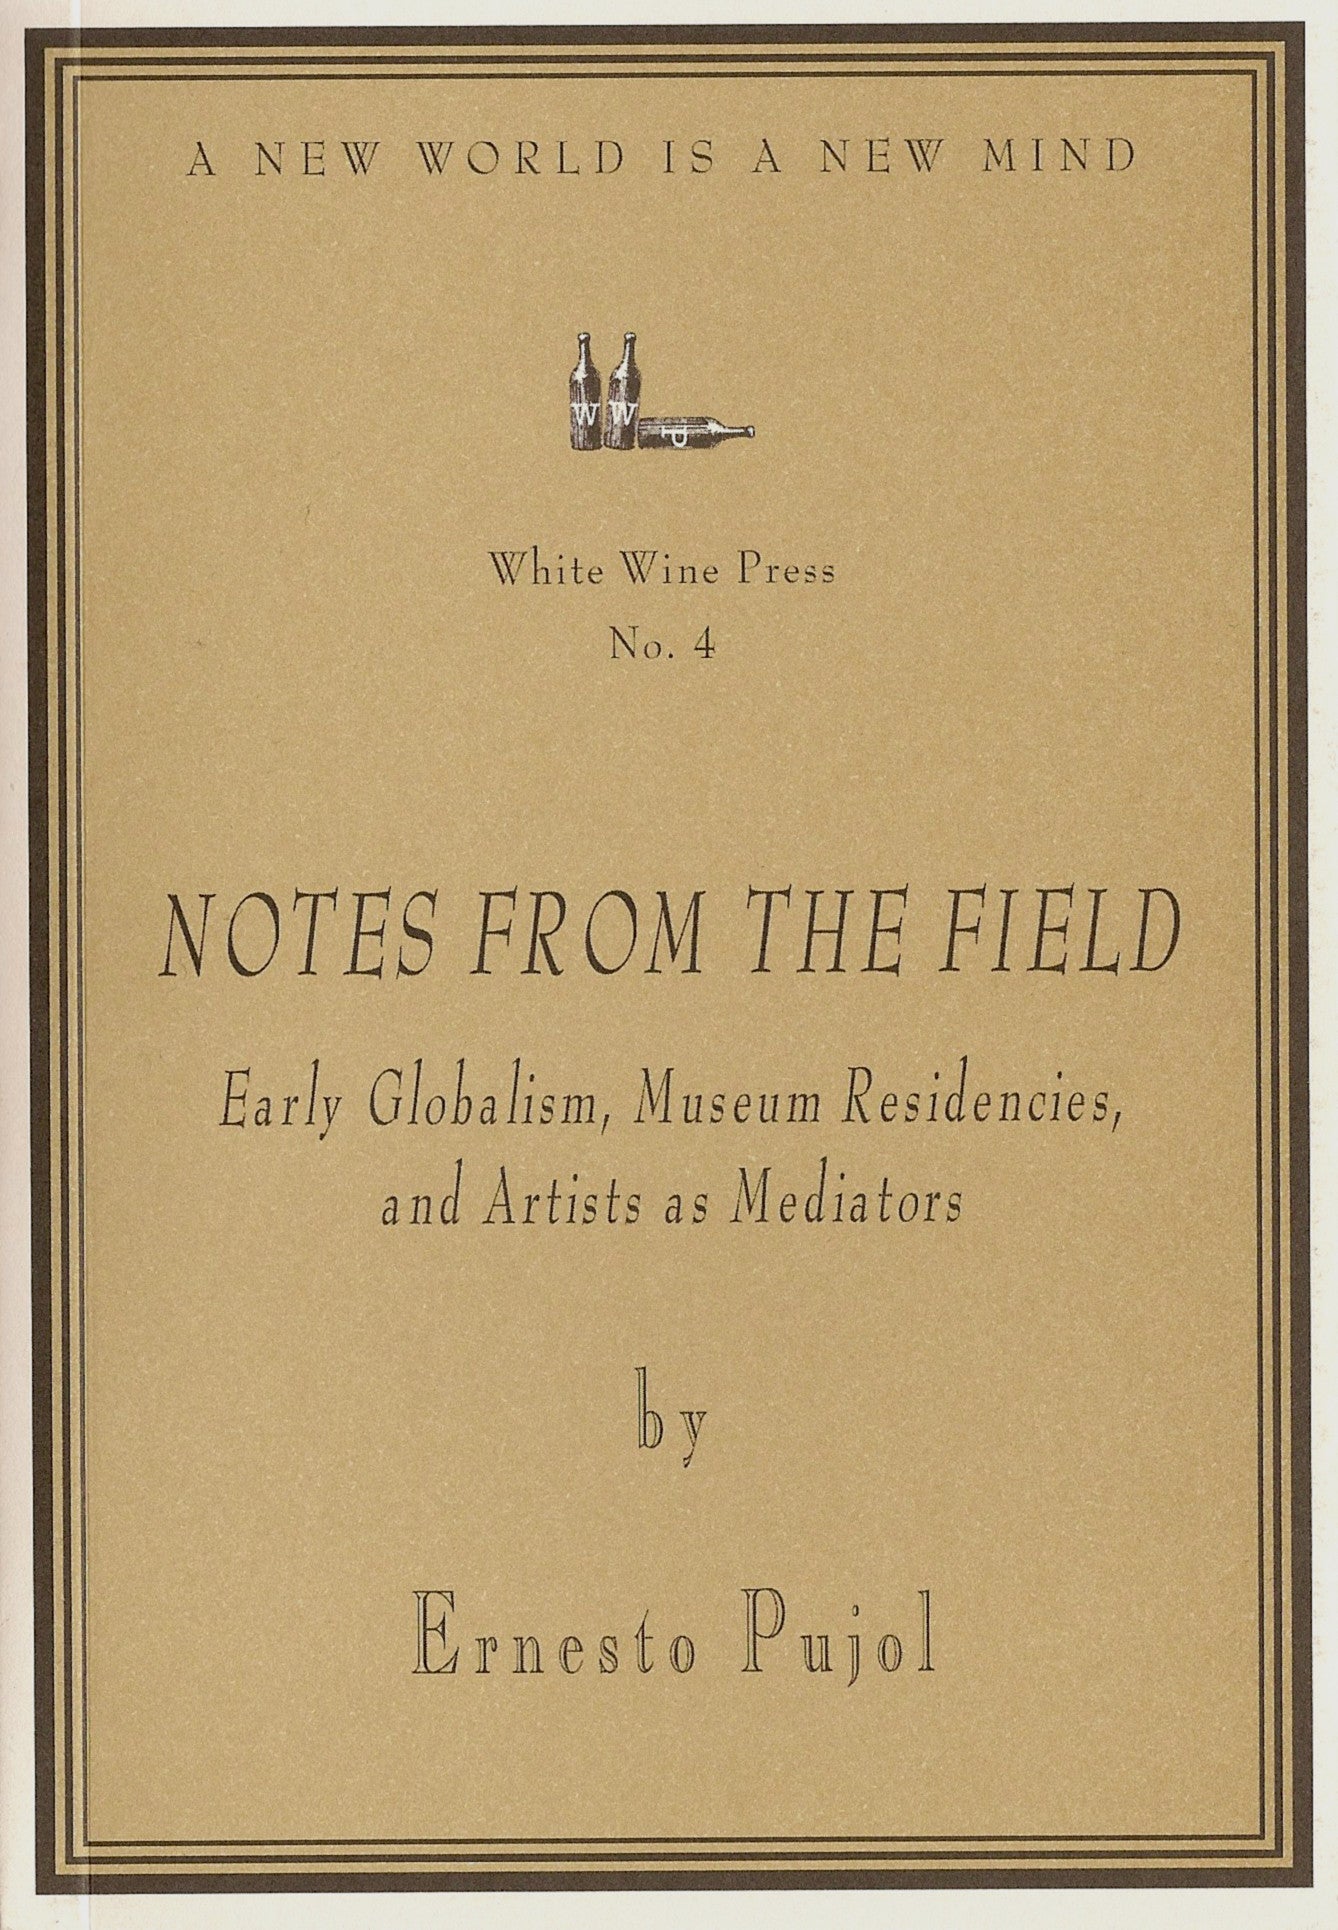 Notes From the Field by Ernesto Pujol [White Wine Press No. 4]